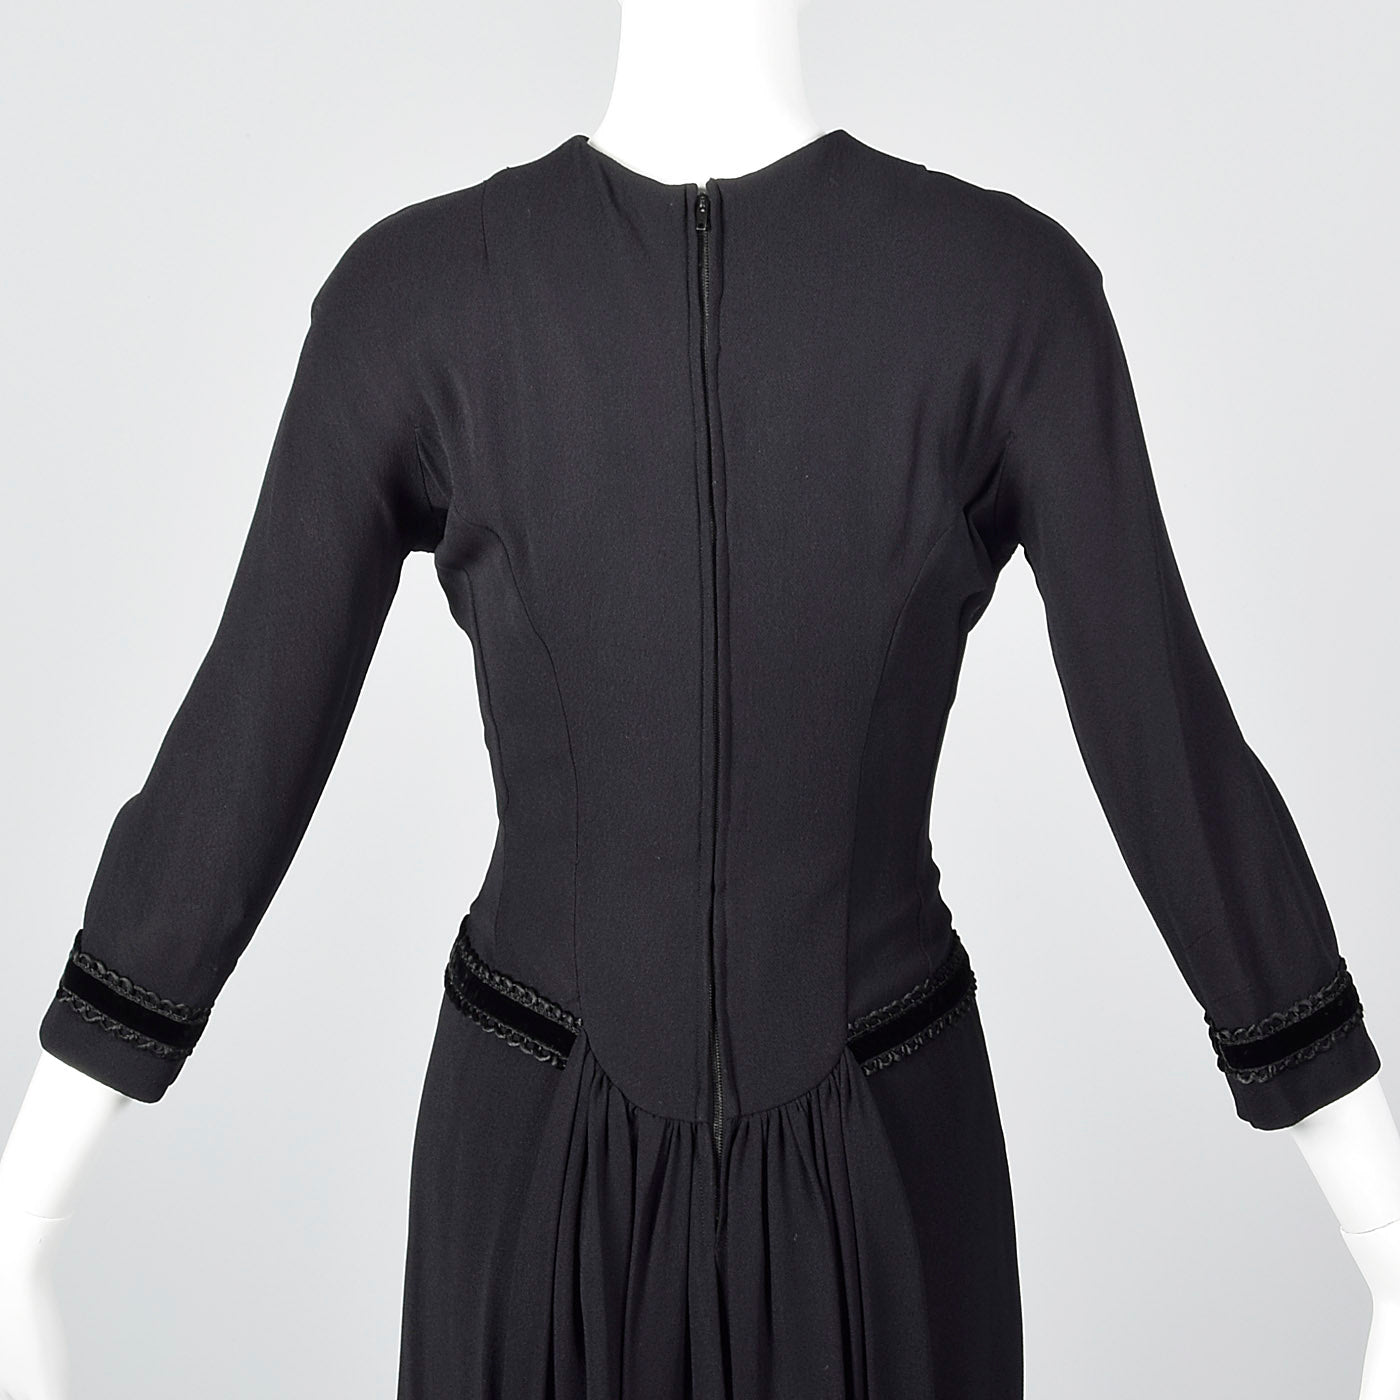 1950s Black Dress with Drop Waist and Bustle Train